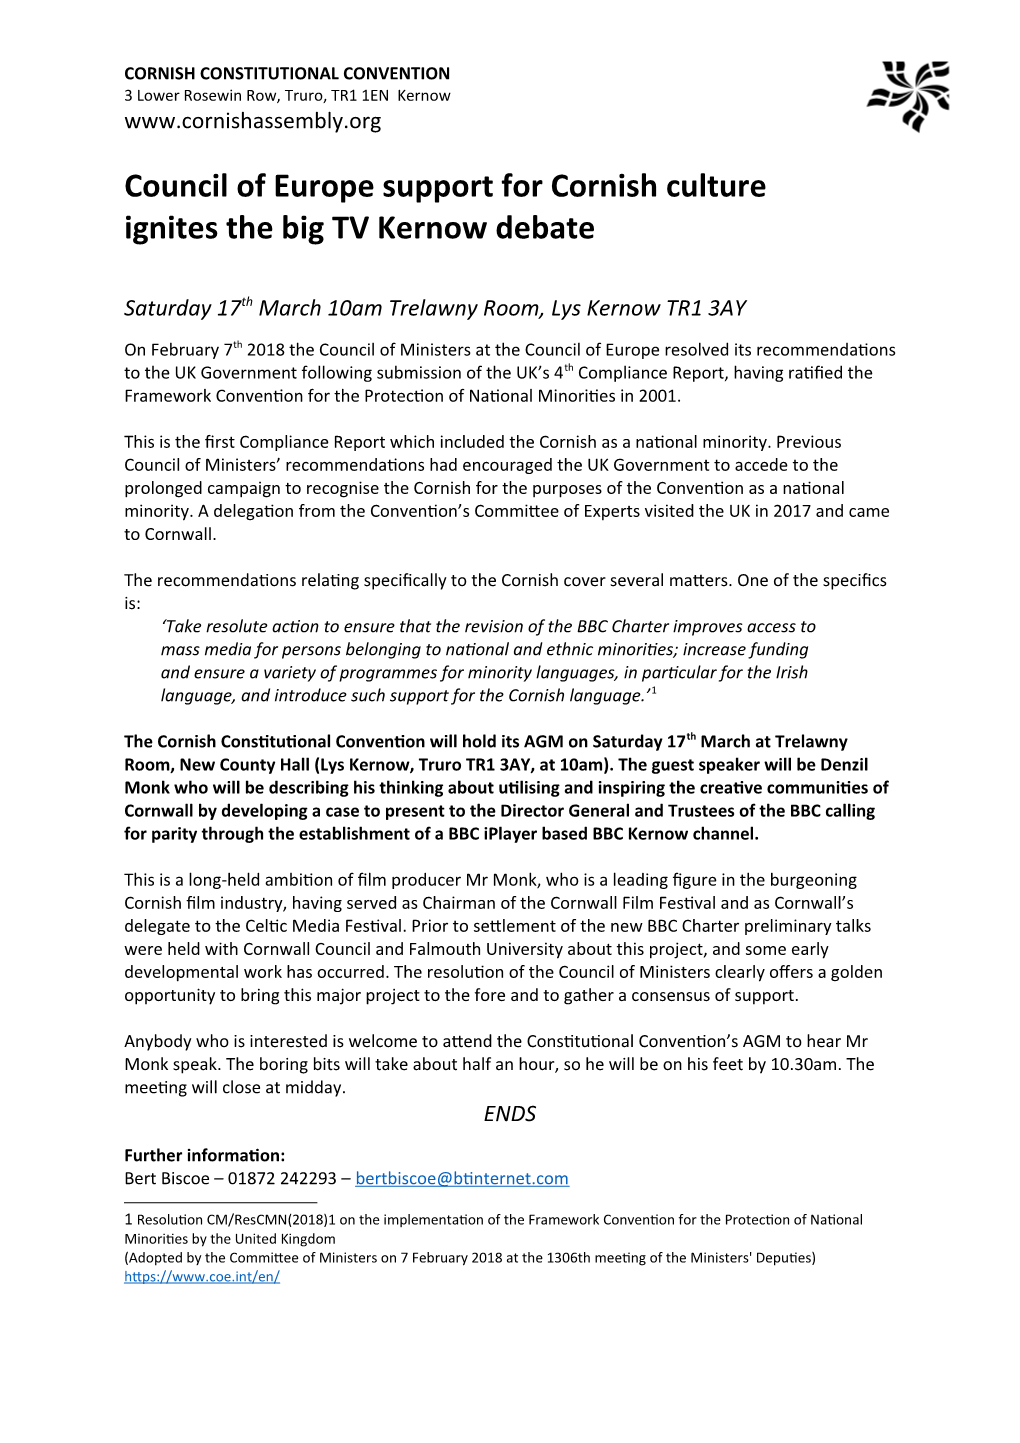 Council of Europe Support for Cornish Culture Ignites the Big TV Kernow Debate